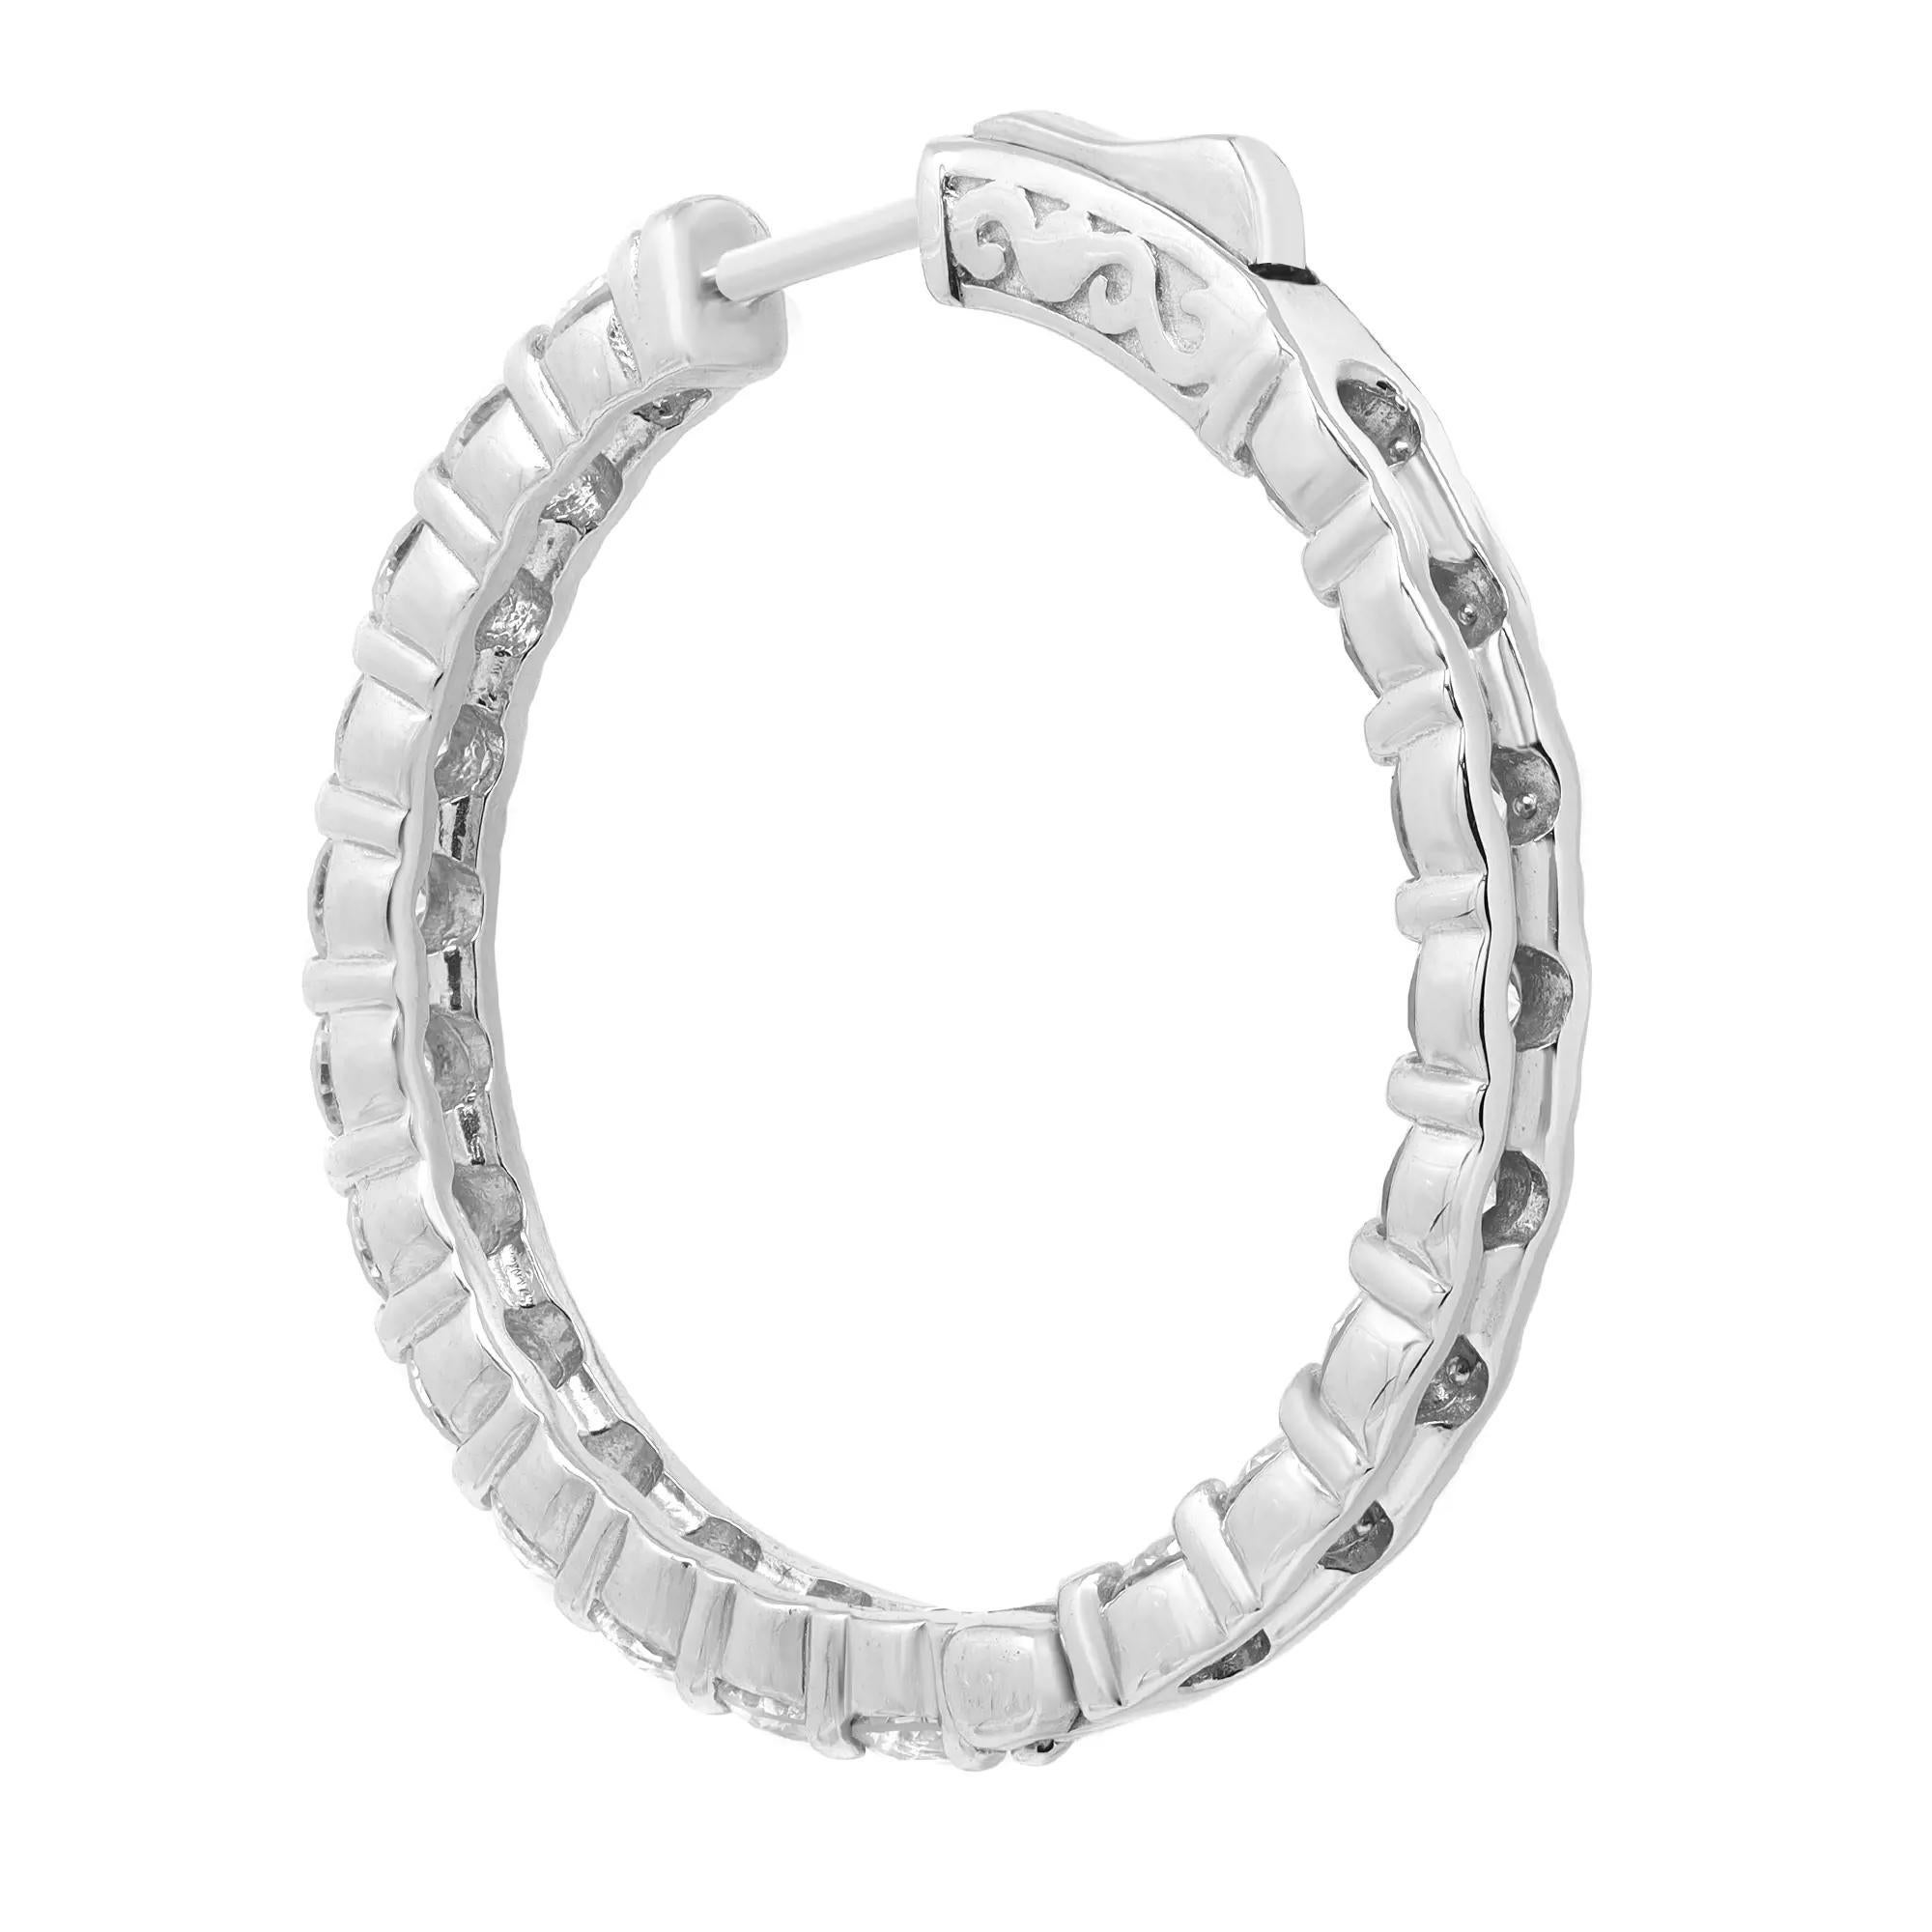 These stylish and elegant 14k white gold hoop earrings feature 40 prong-set round brilliant cut diamonds in a single line. The diamonds embellish these earrings on the inside and the outside, offering a dazzling look from every angle. Total diamond